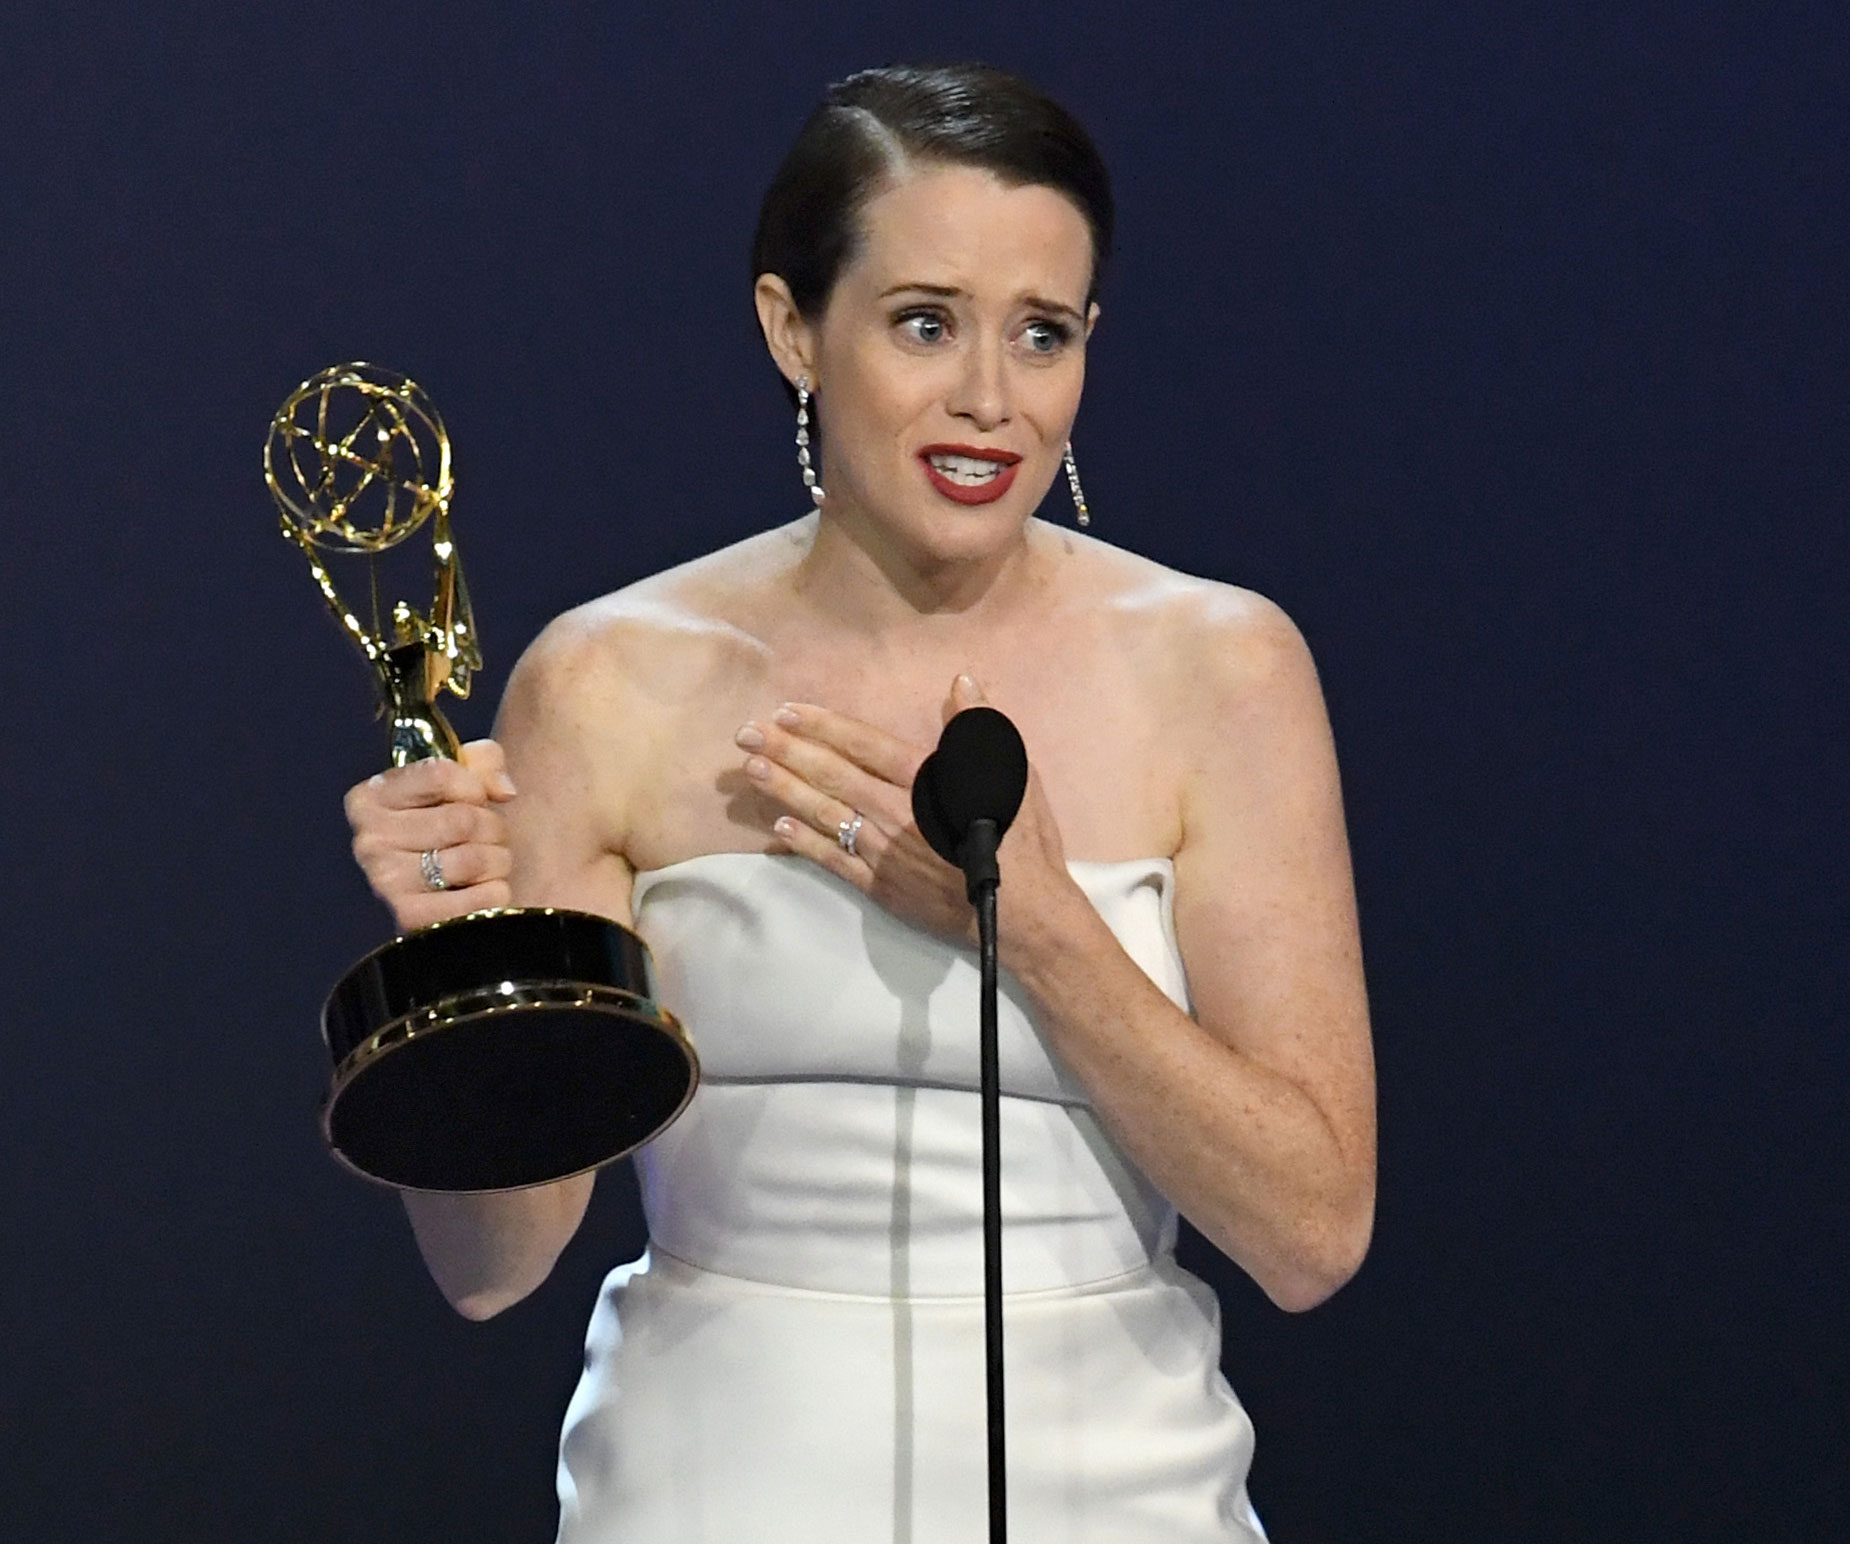 Emmys 2018: Claire Foy wins ‘Outstanding Actress in a Drama’ for ‘The Crown’